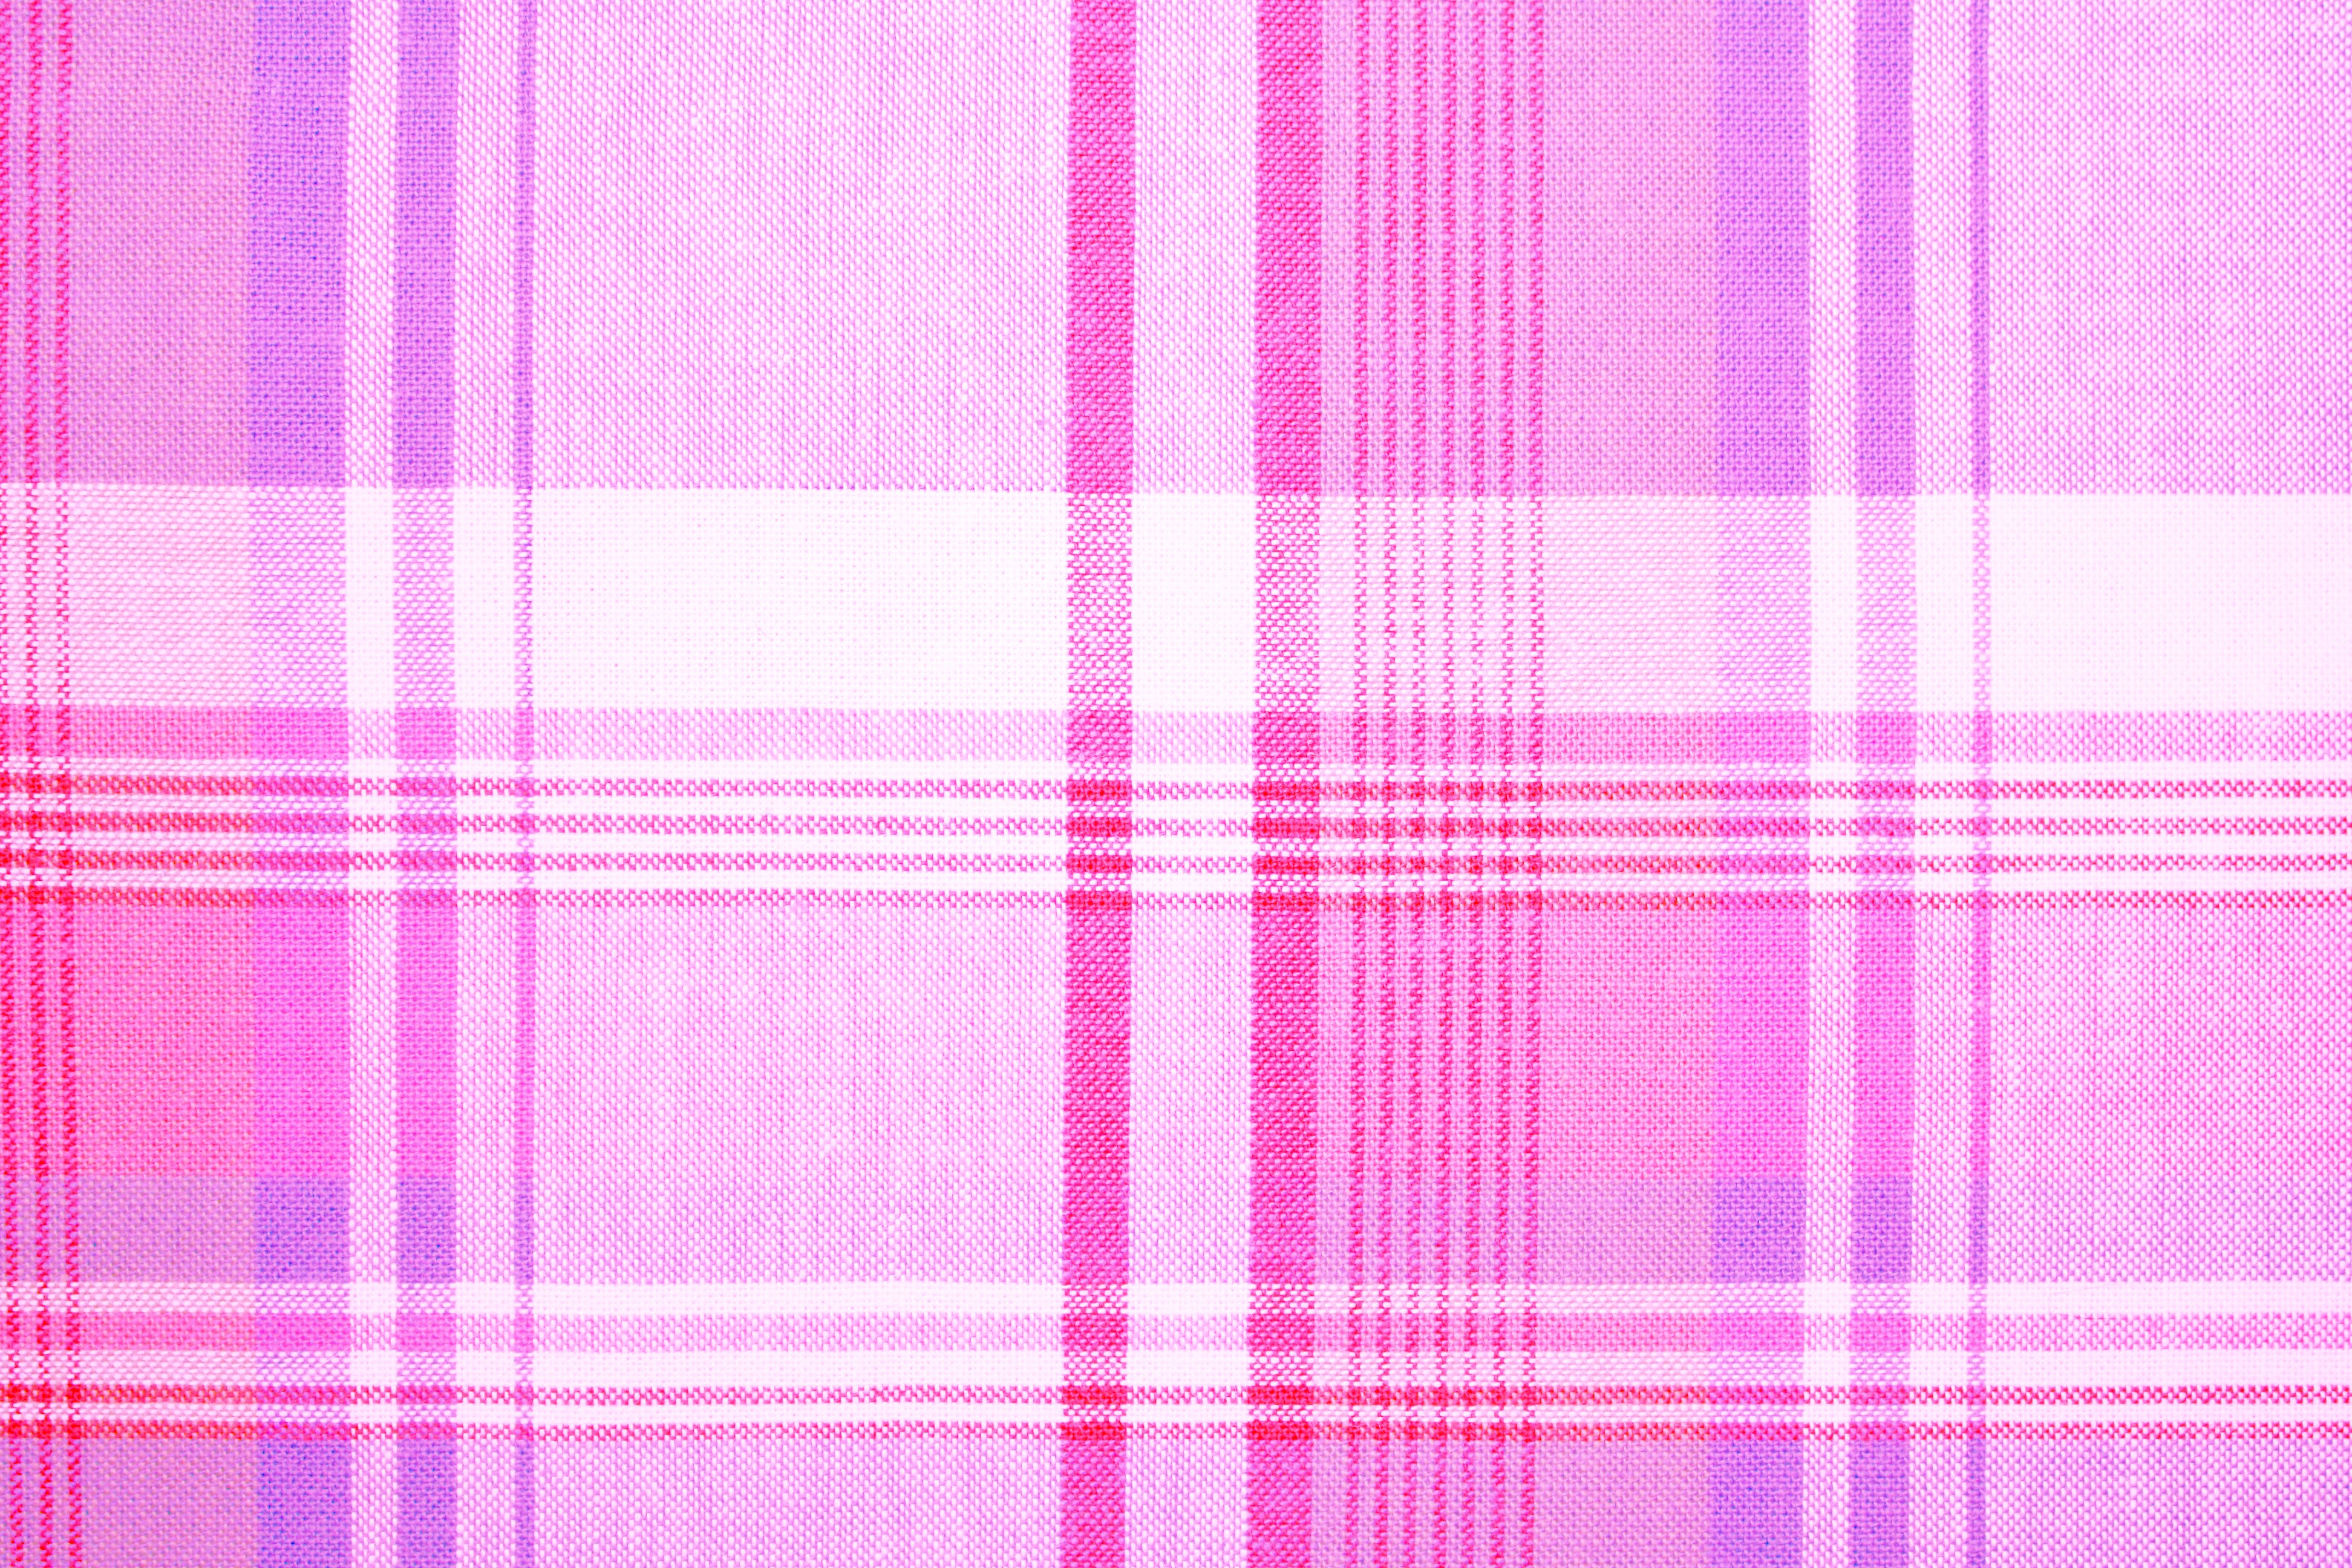 Pink and Purple Plaid Fabric Texture   Free High Resolution Photo